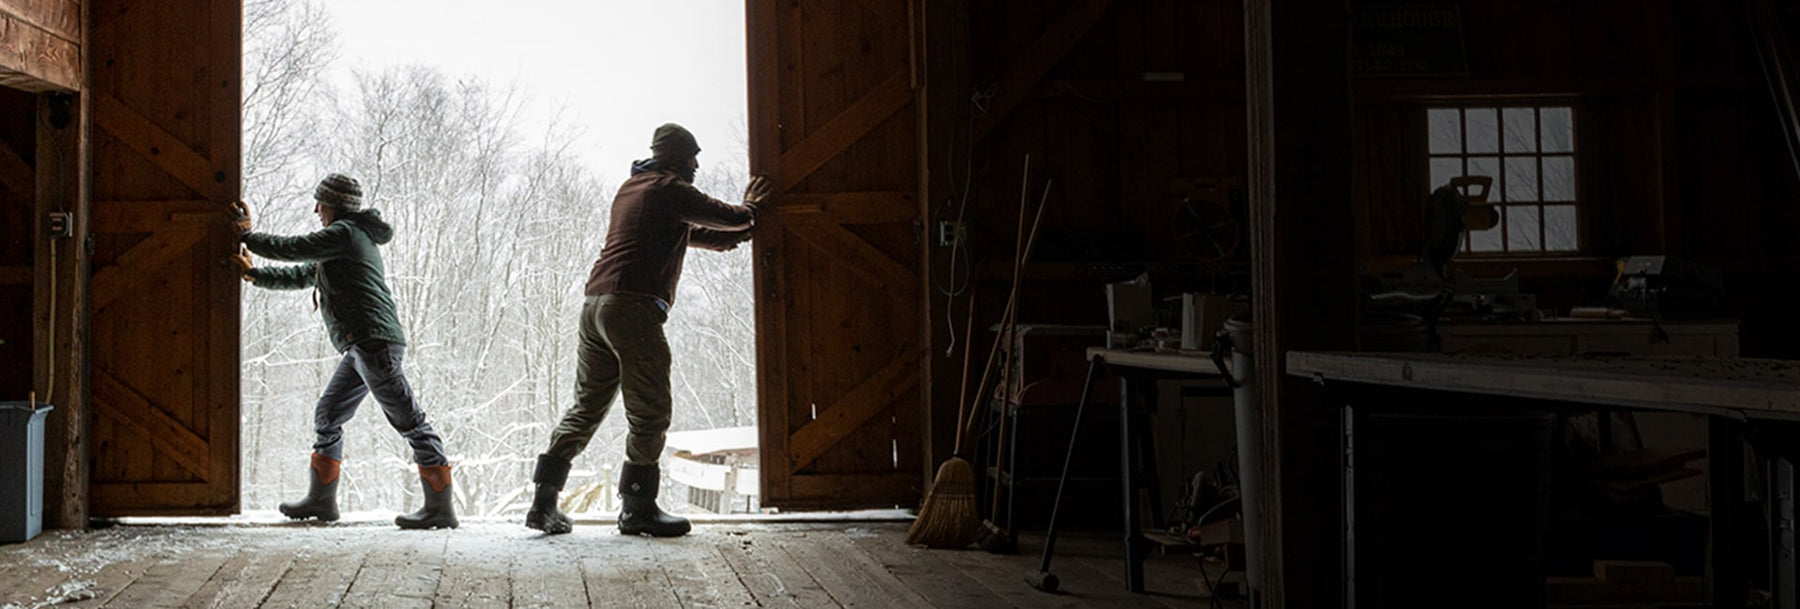 Two people pushing barn doors open with snow covered trees outside in the background